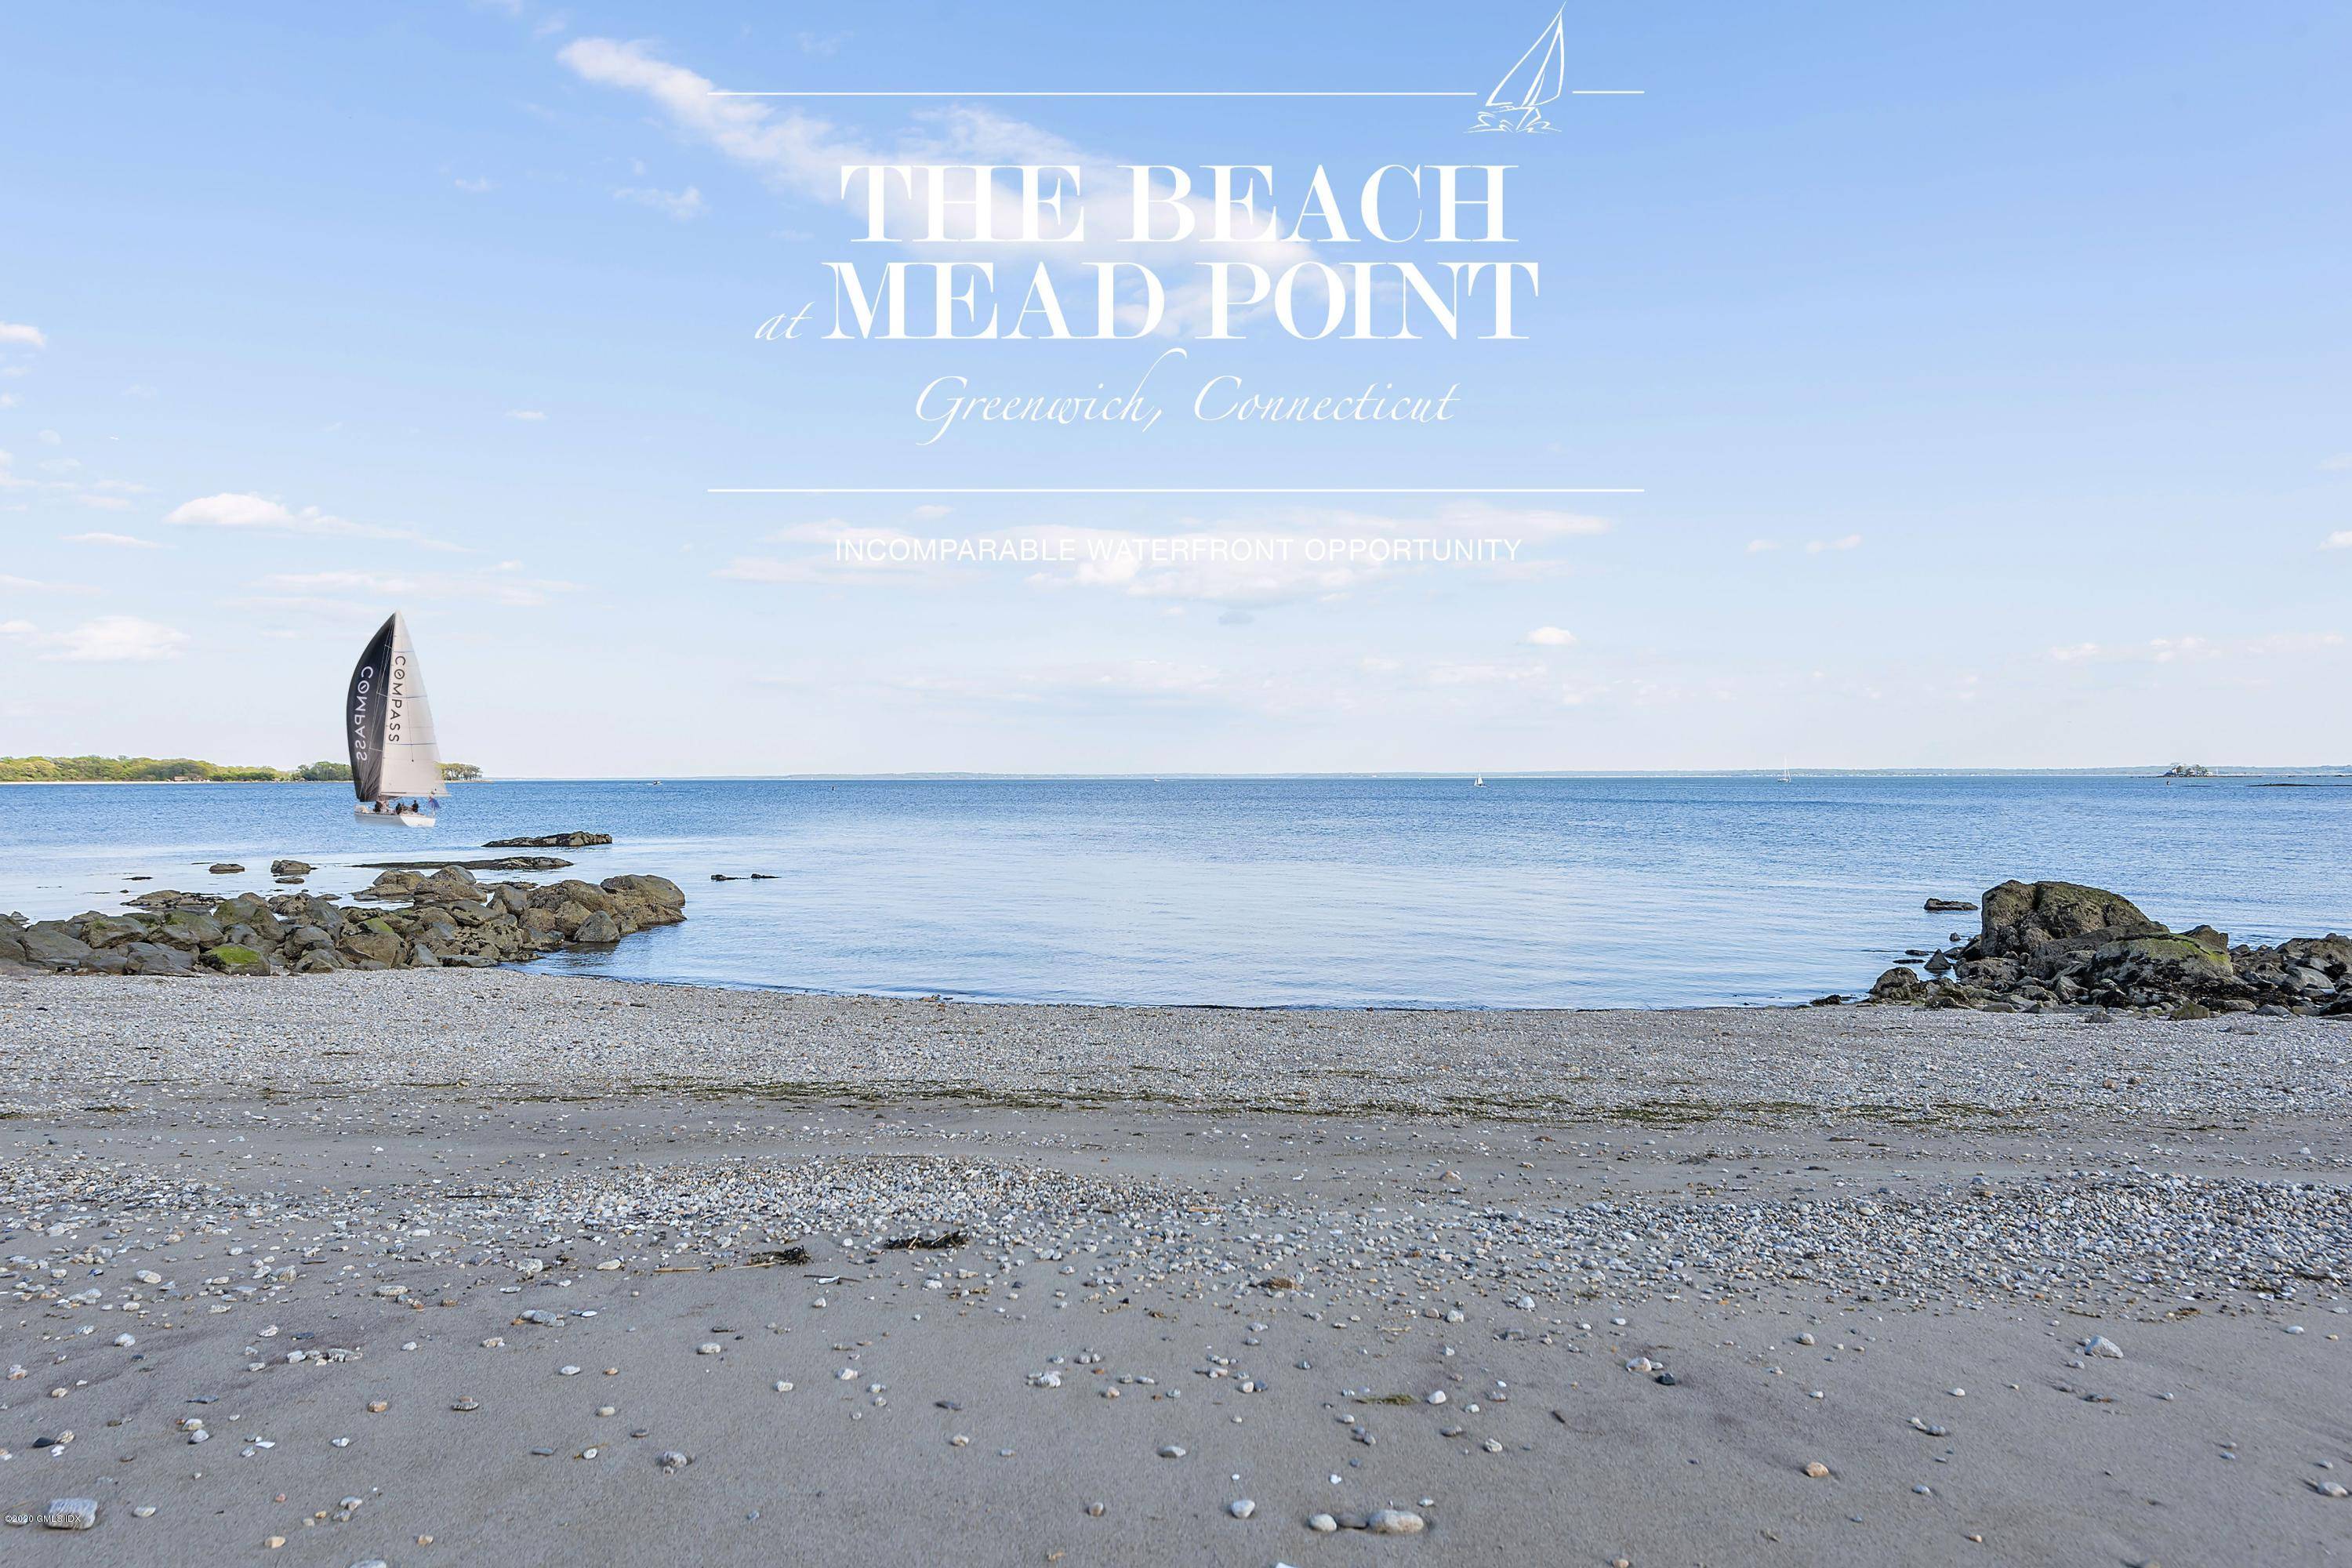 Unrivaled opportunity to develop on the pristine waters of the Long Island Sound, in the exclusive gated Mead Point Association of Greenwich, CT.